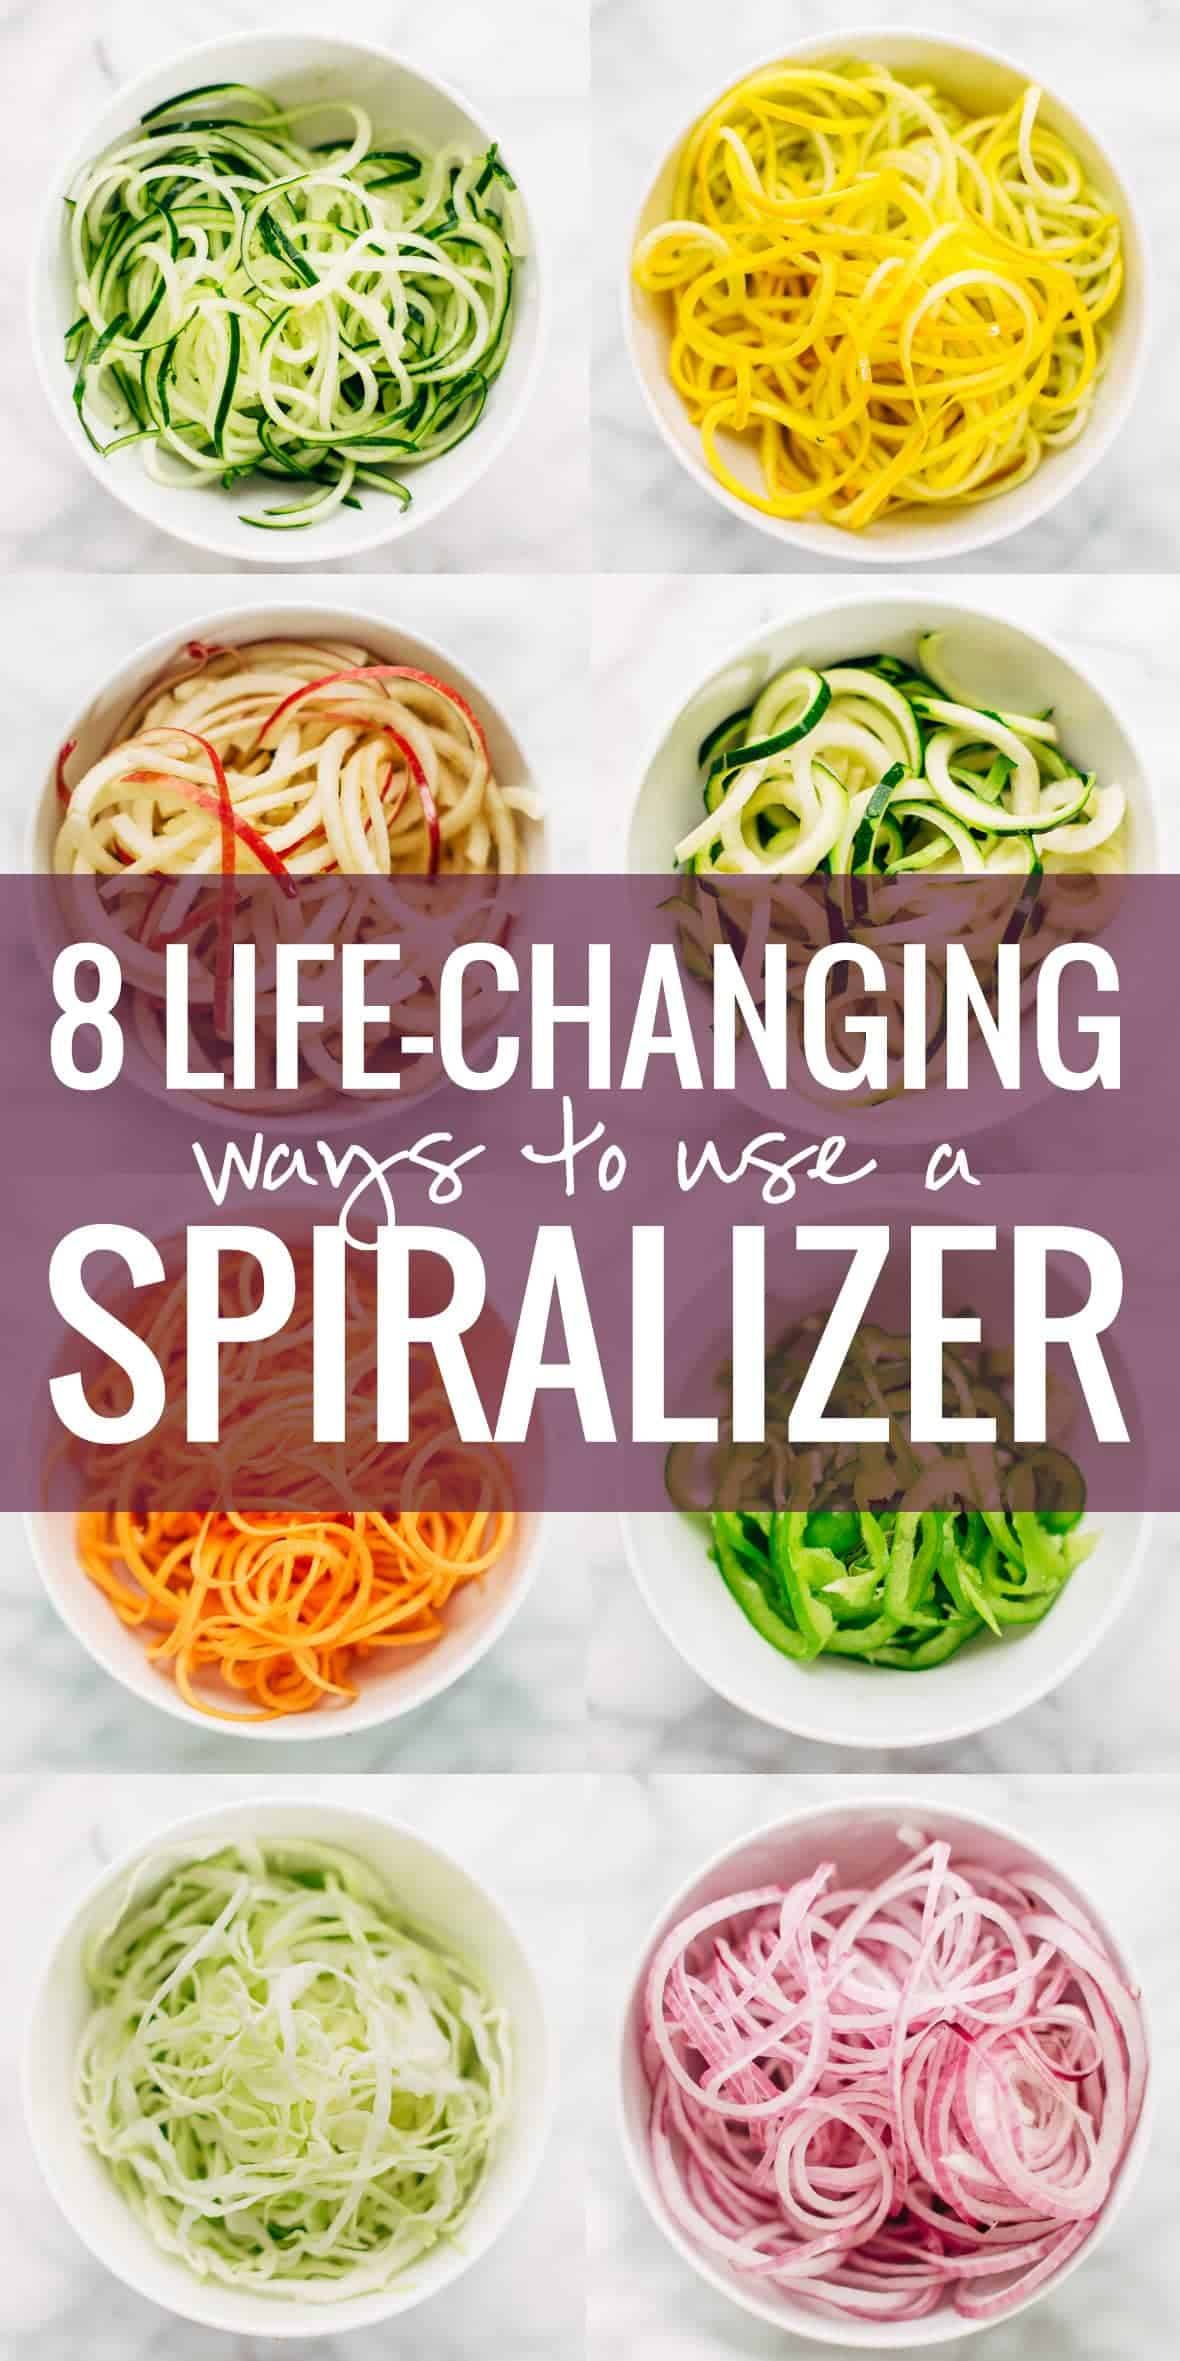 8 Life-Changing way to use a spiralizer collage.